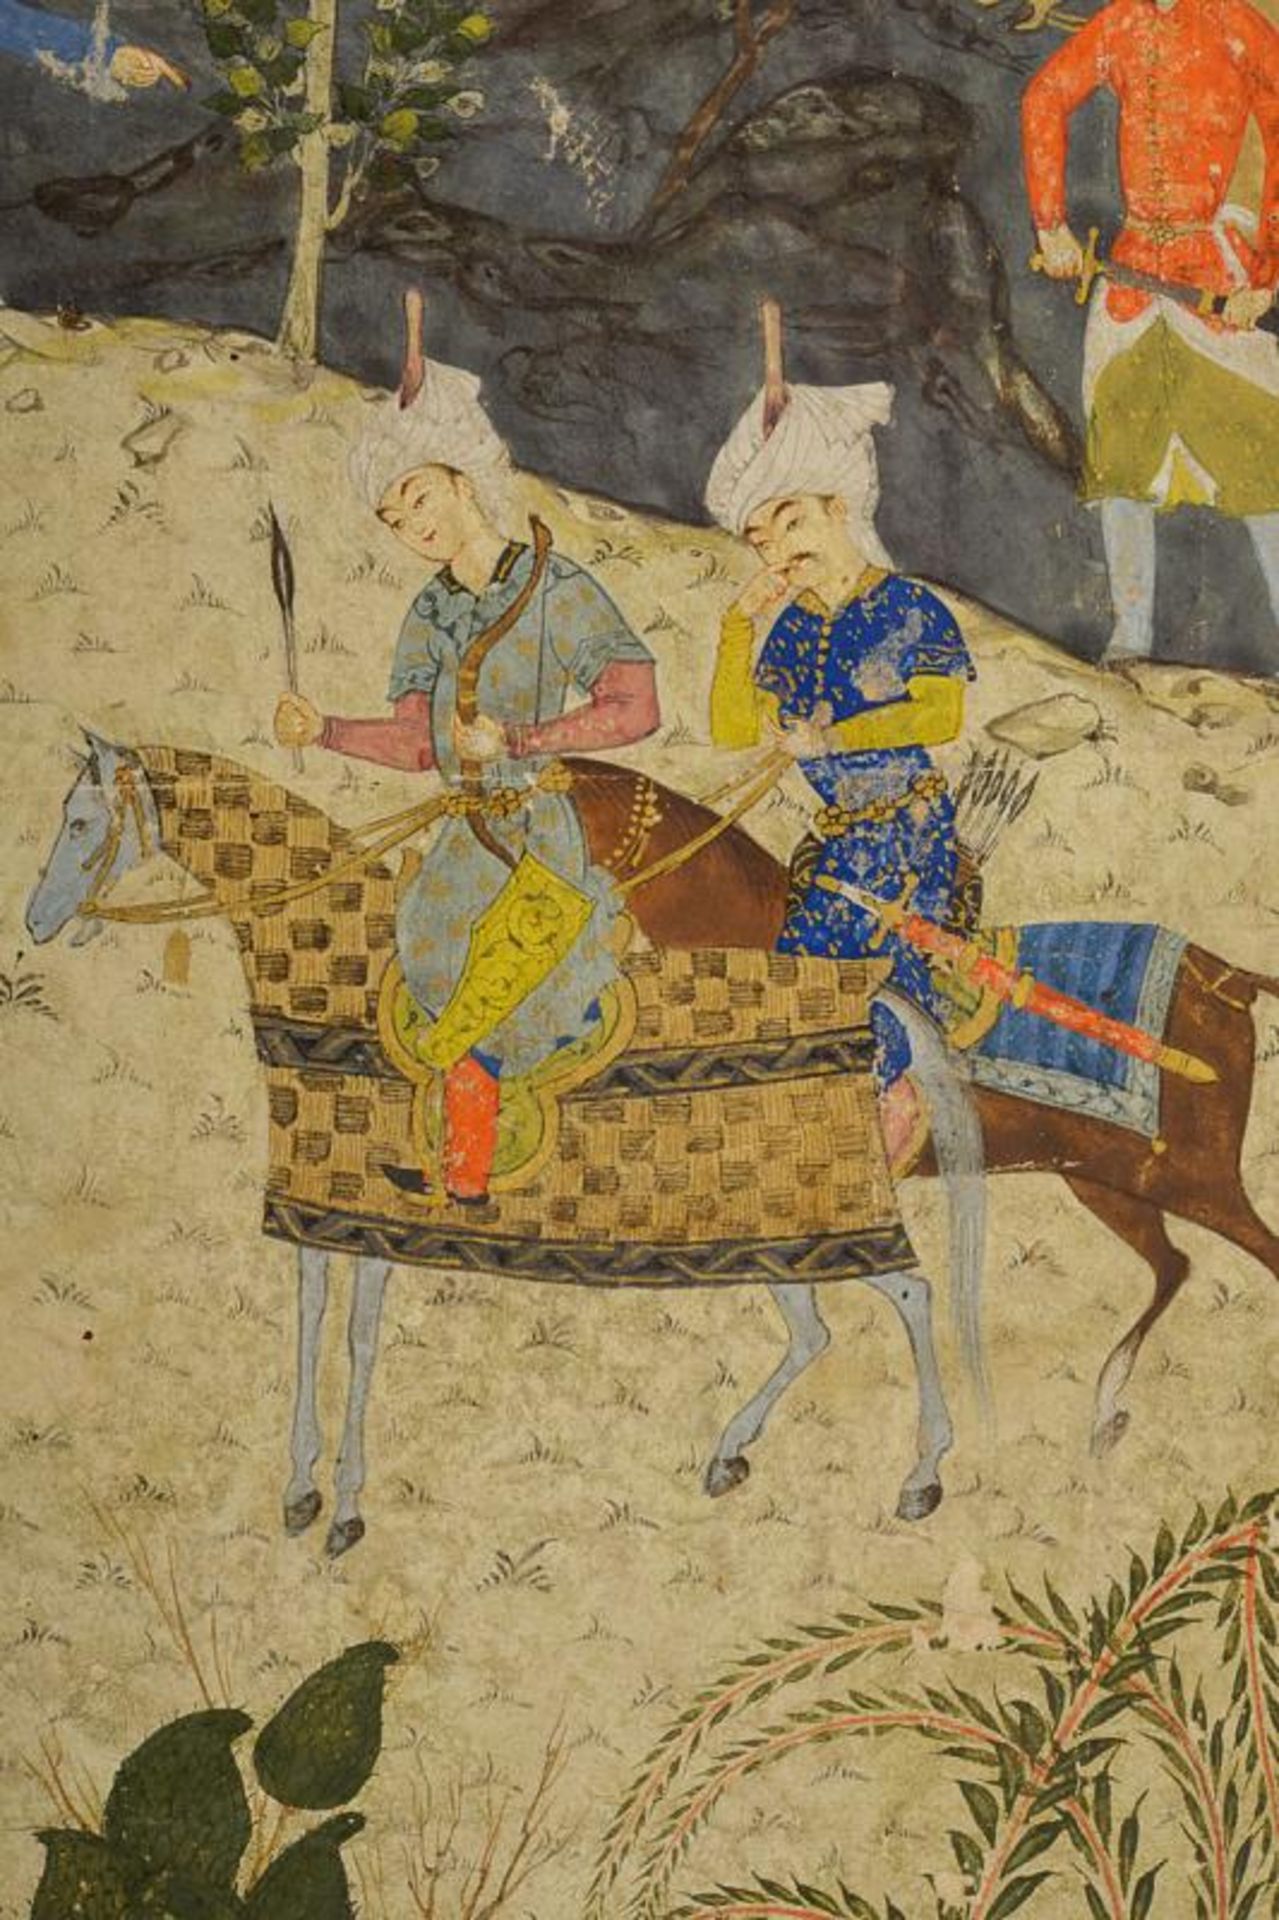 An illustration of the Shahnameh by Ferdowsi - Image 2 of 6